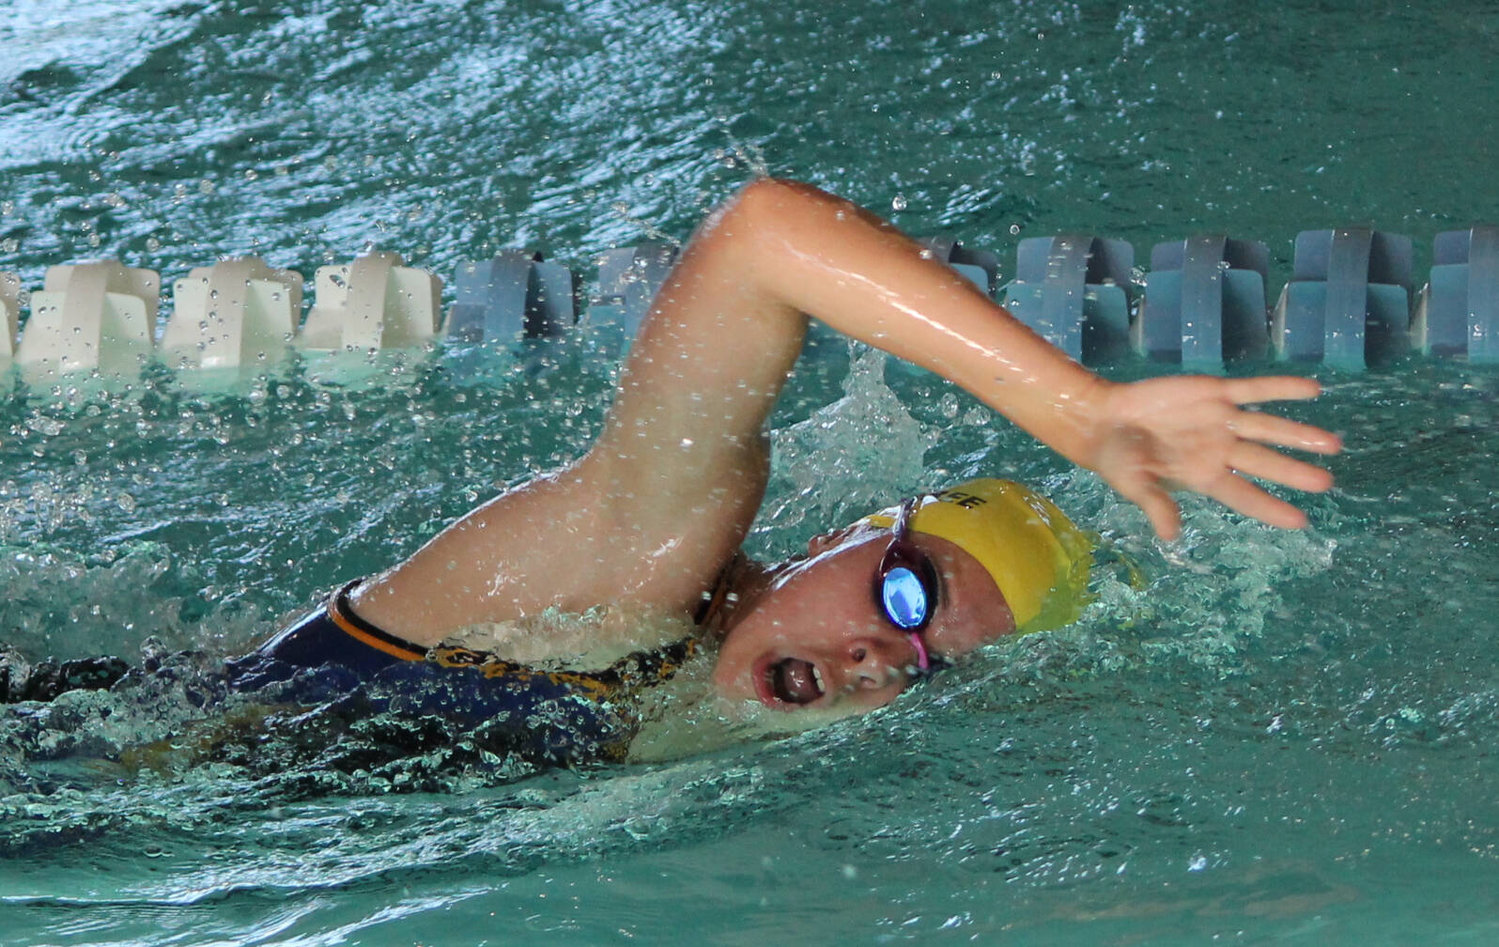 Ally Maybee gets some air during the 50 Meter Freestyle.